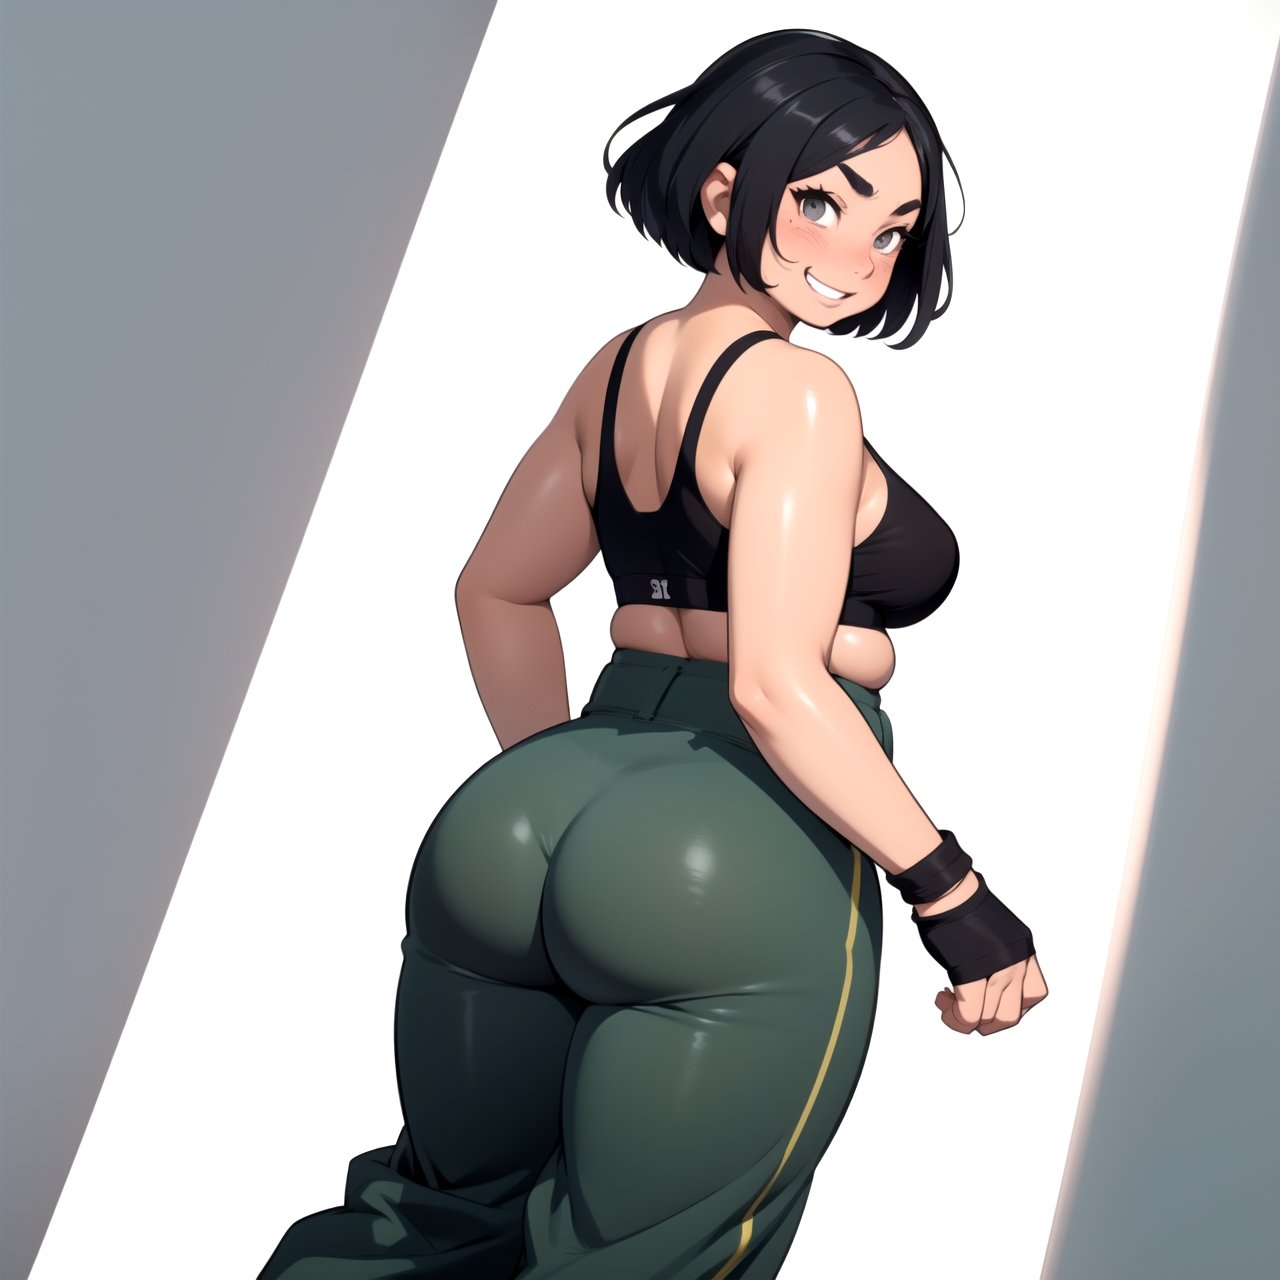 masterpiece, best quality, (mature female, plump, curvy figure, wide hips, thicc, large breasts), ((short)), (short hair, tomboy), black hair, thick eyebrows, ((tan, dark skin)), martial artist, (((hip vent, japanese clothes, dougi, baggy pants))), fingerless gloves, (clothes around waist, sports-bra), happy, smiling, blushing, action pose, fighting_stance, dynamic angle, from behind, manga style illustration,